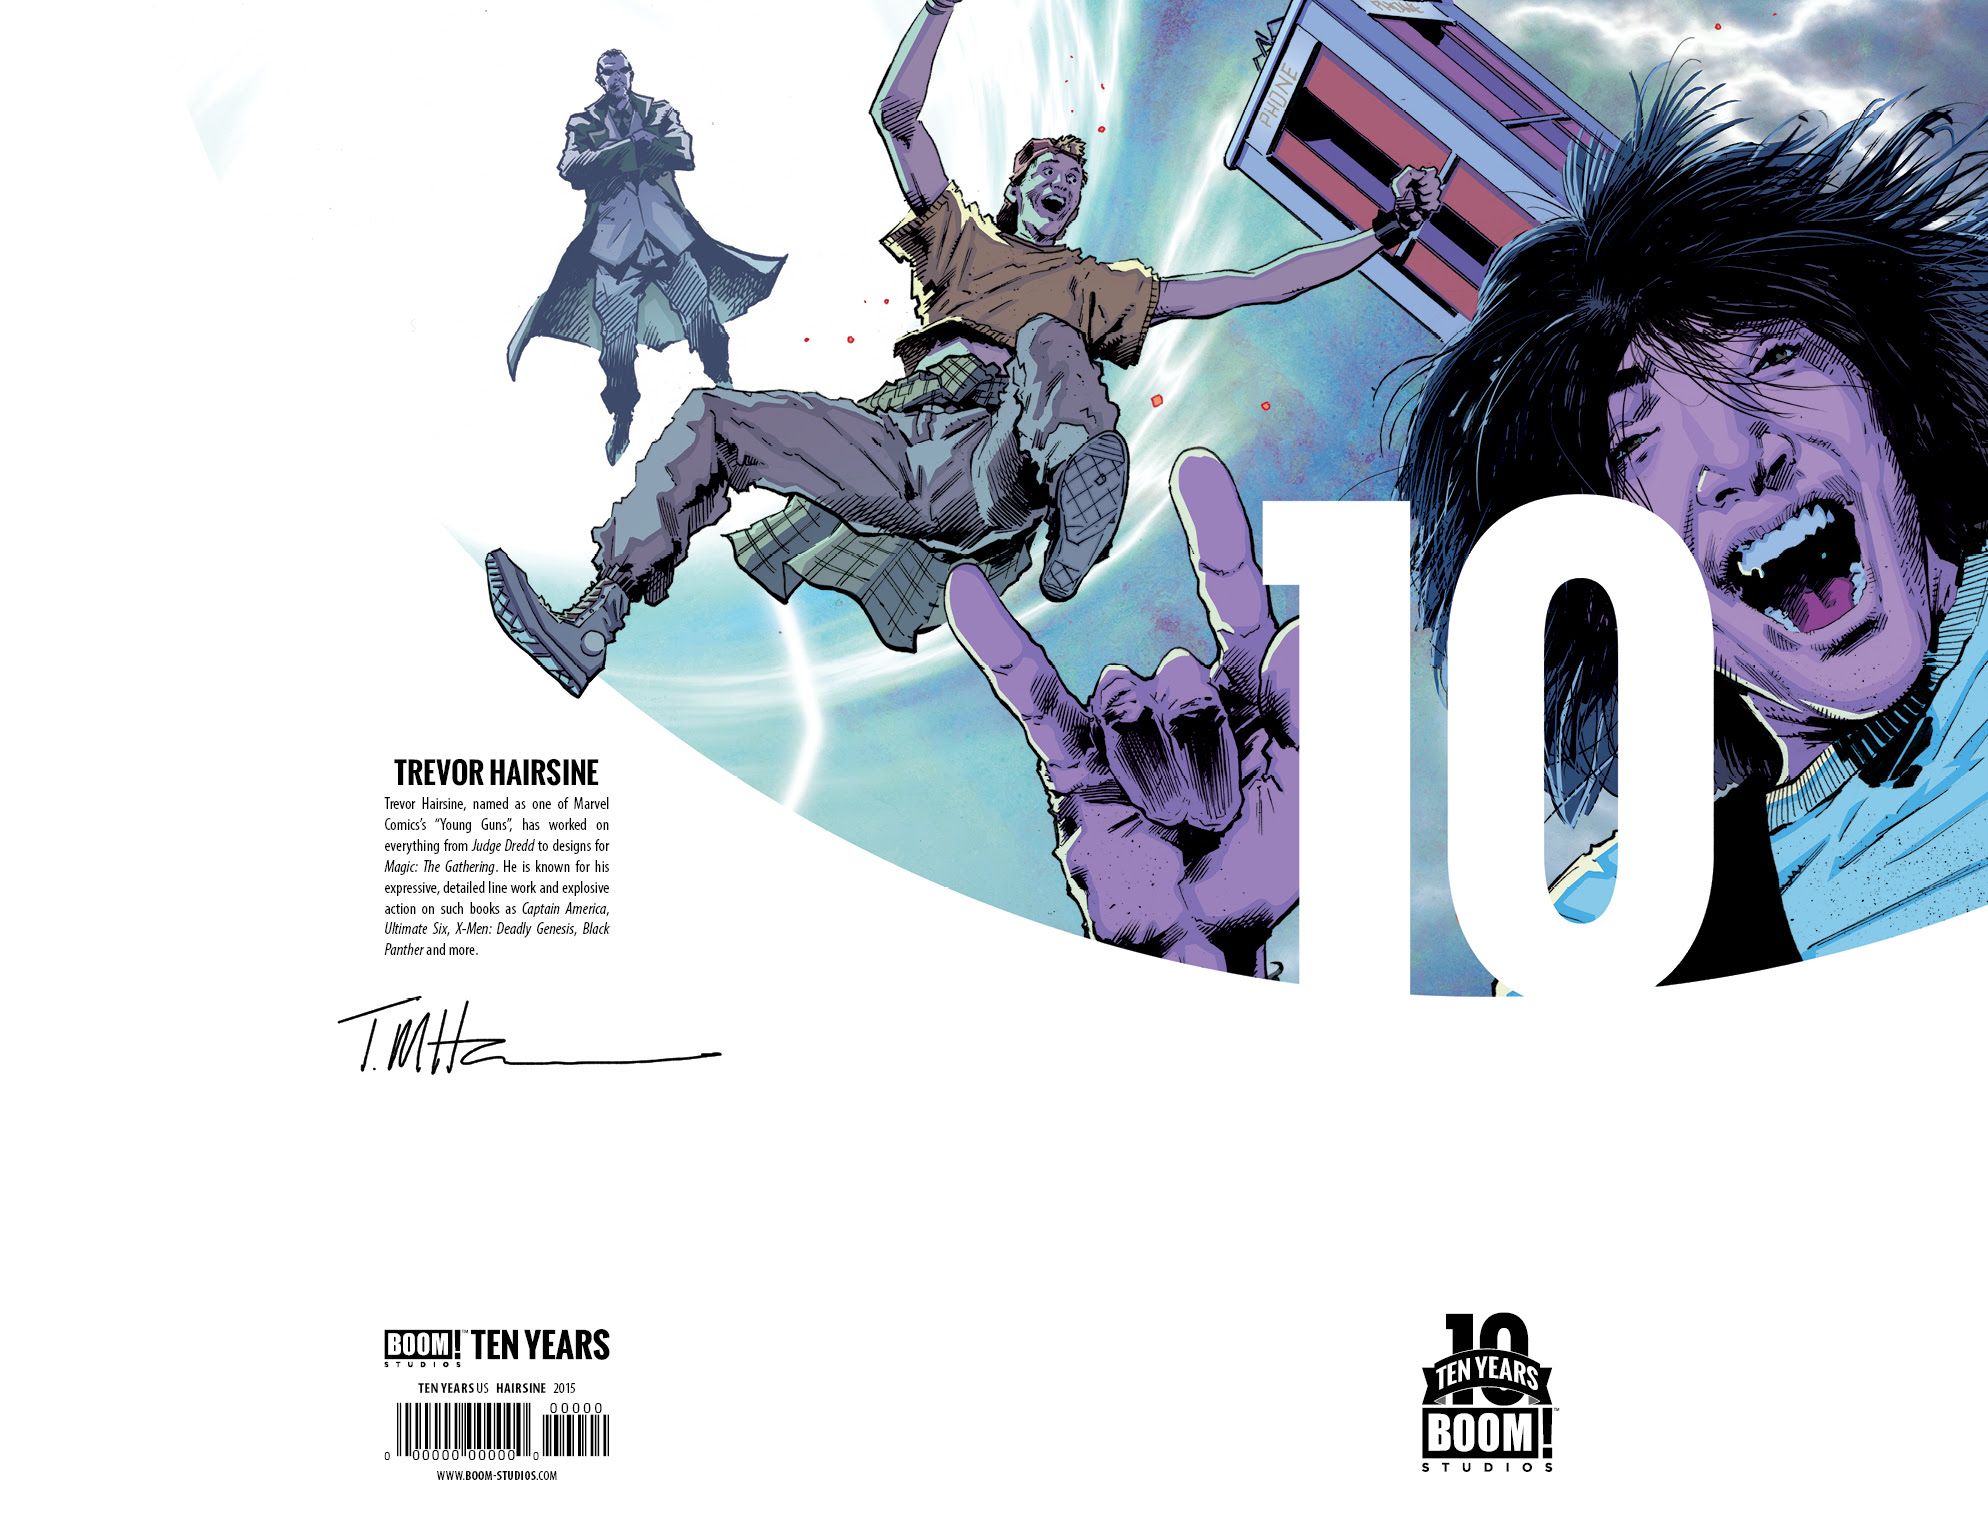 Bill & Ted's Most Triumphant Return #1 10 Years Incentive Cover by Trevor Hairsine